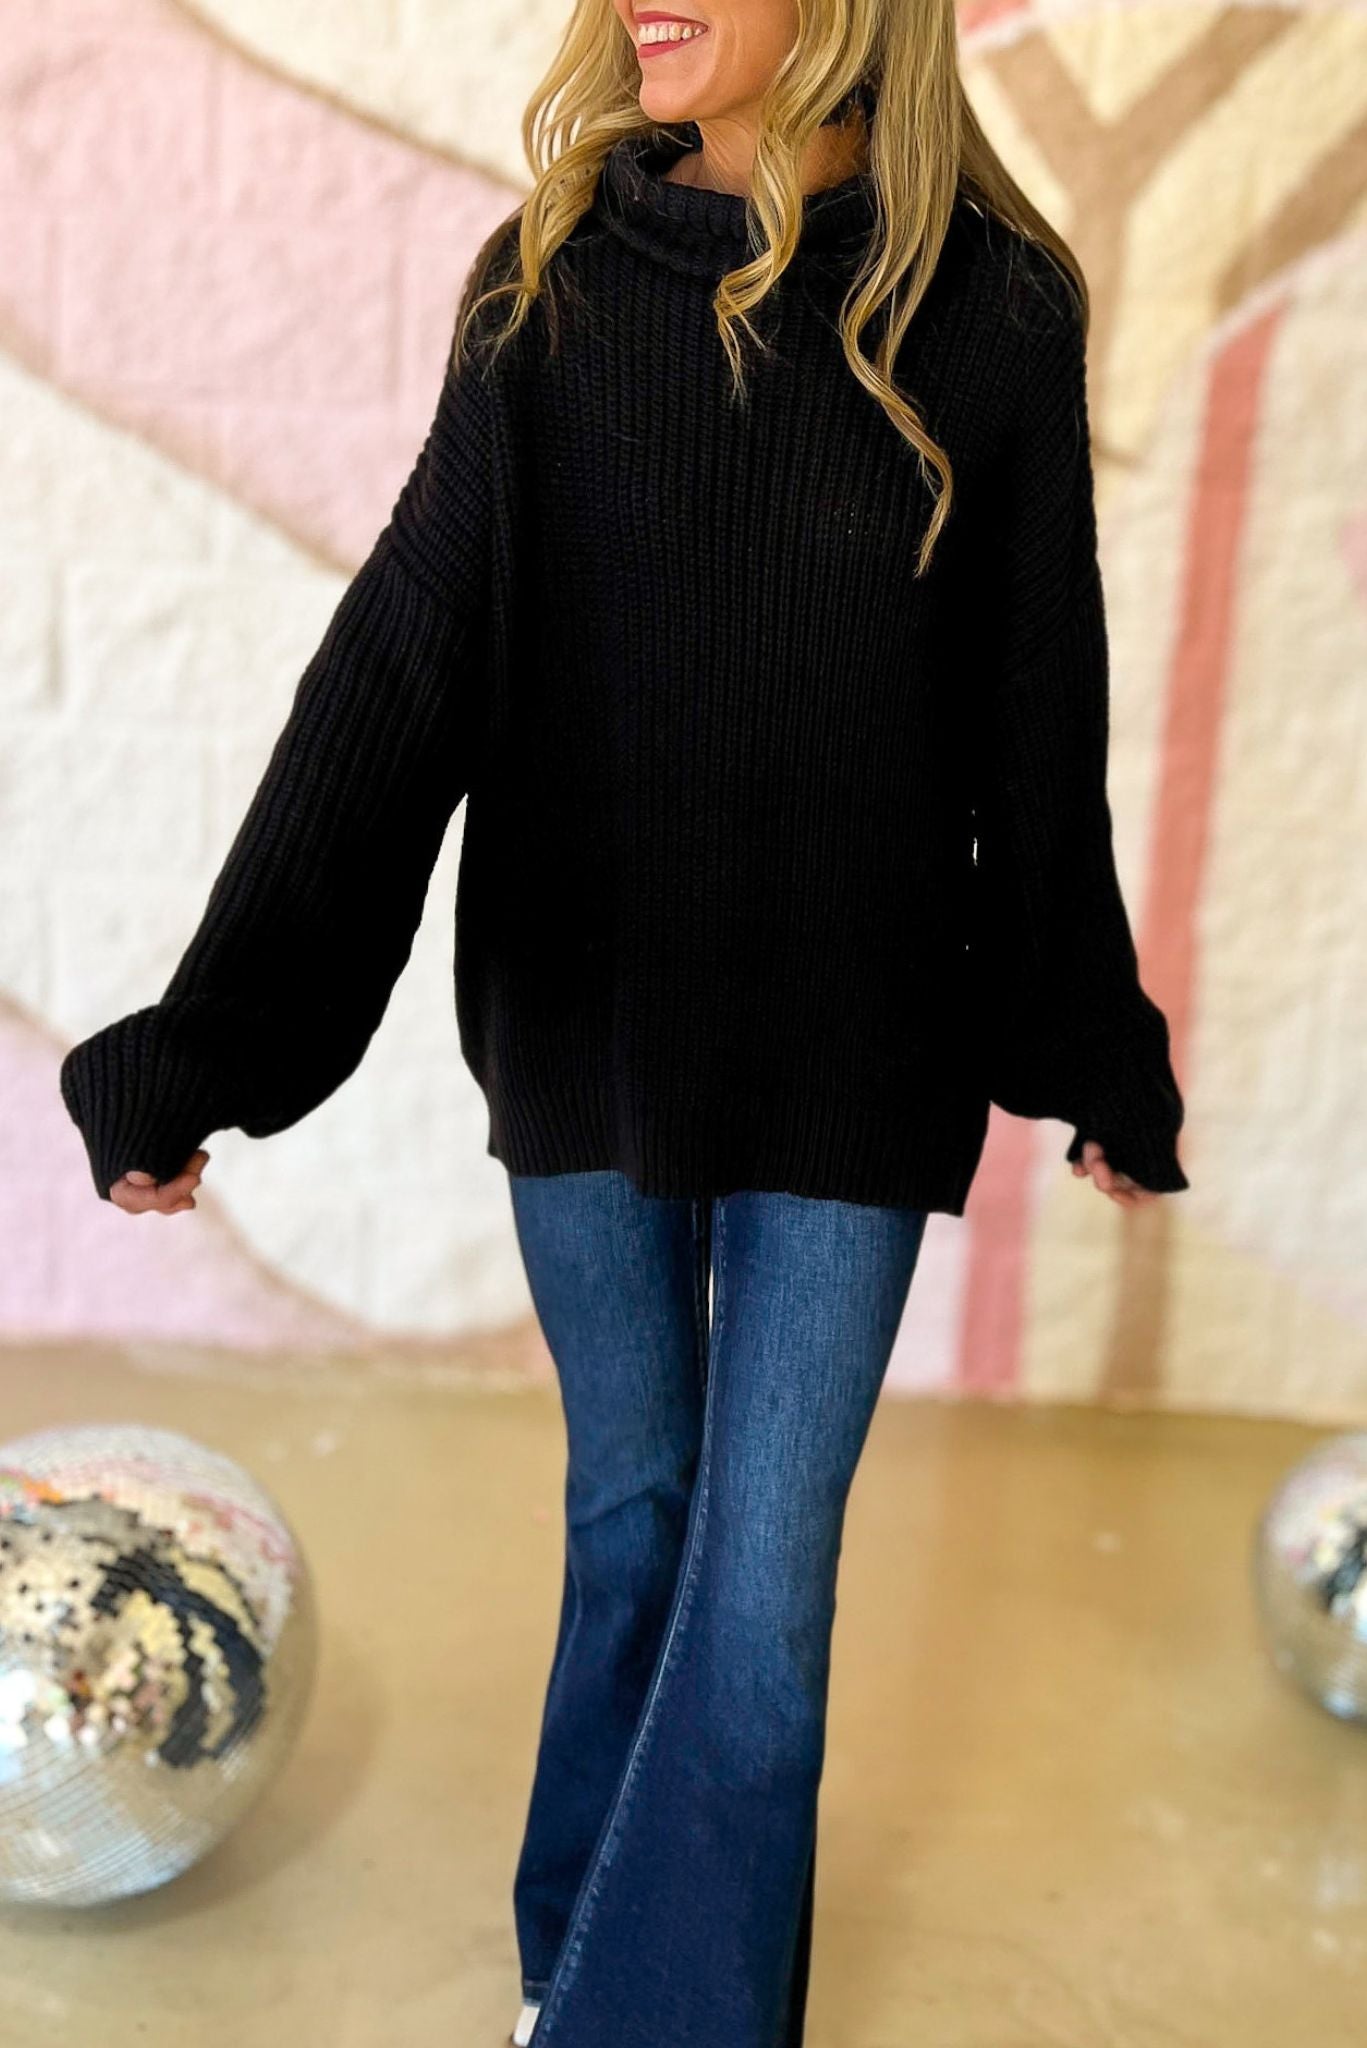 Load image into Gallery viewer, black Turtleneck Knit Sweater, fall fashion, fall must have, staple piece, chic, elevated look, shop style your senses by mallory fitzsimmons
